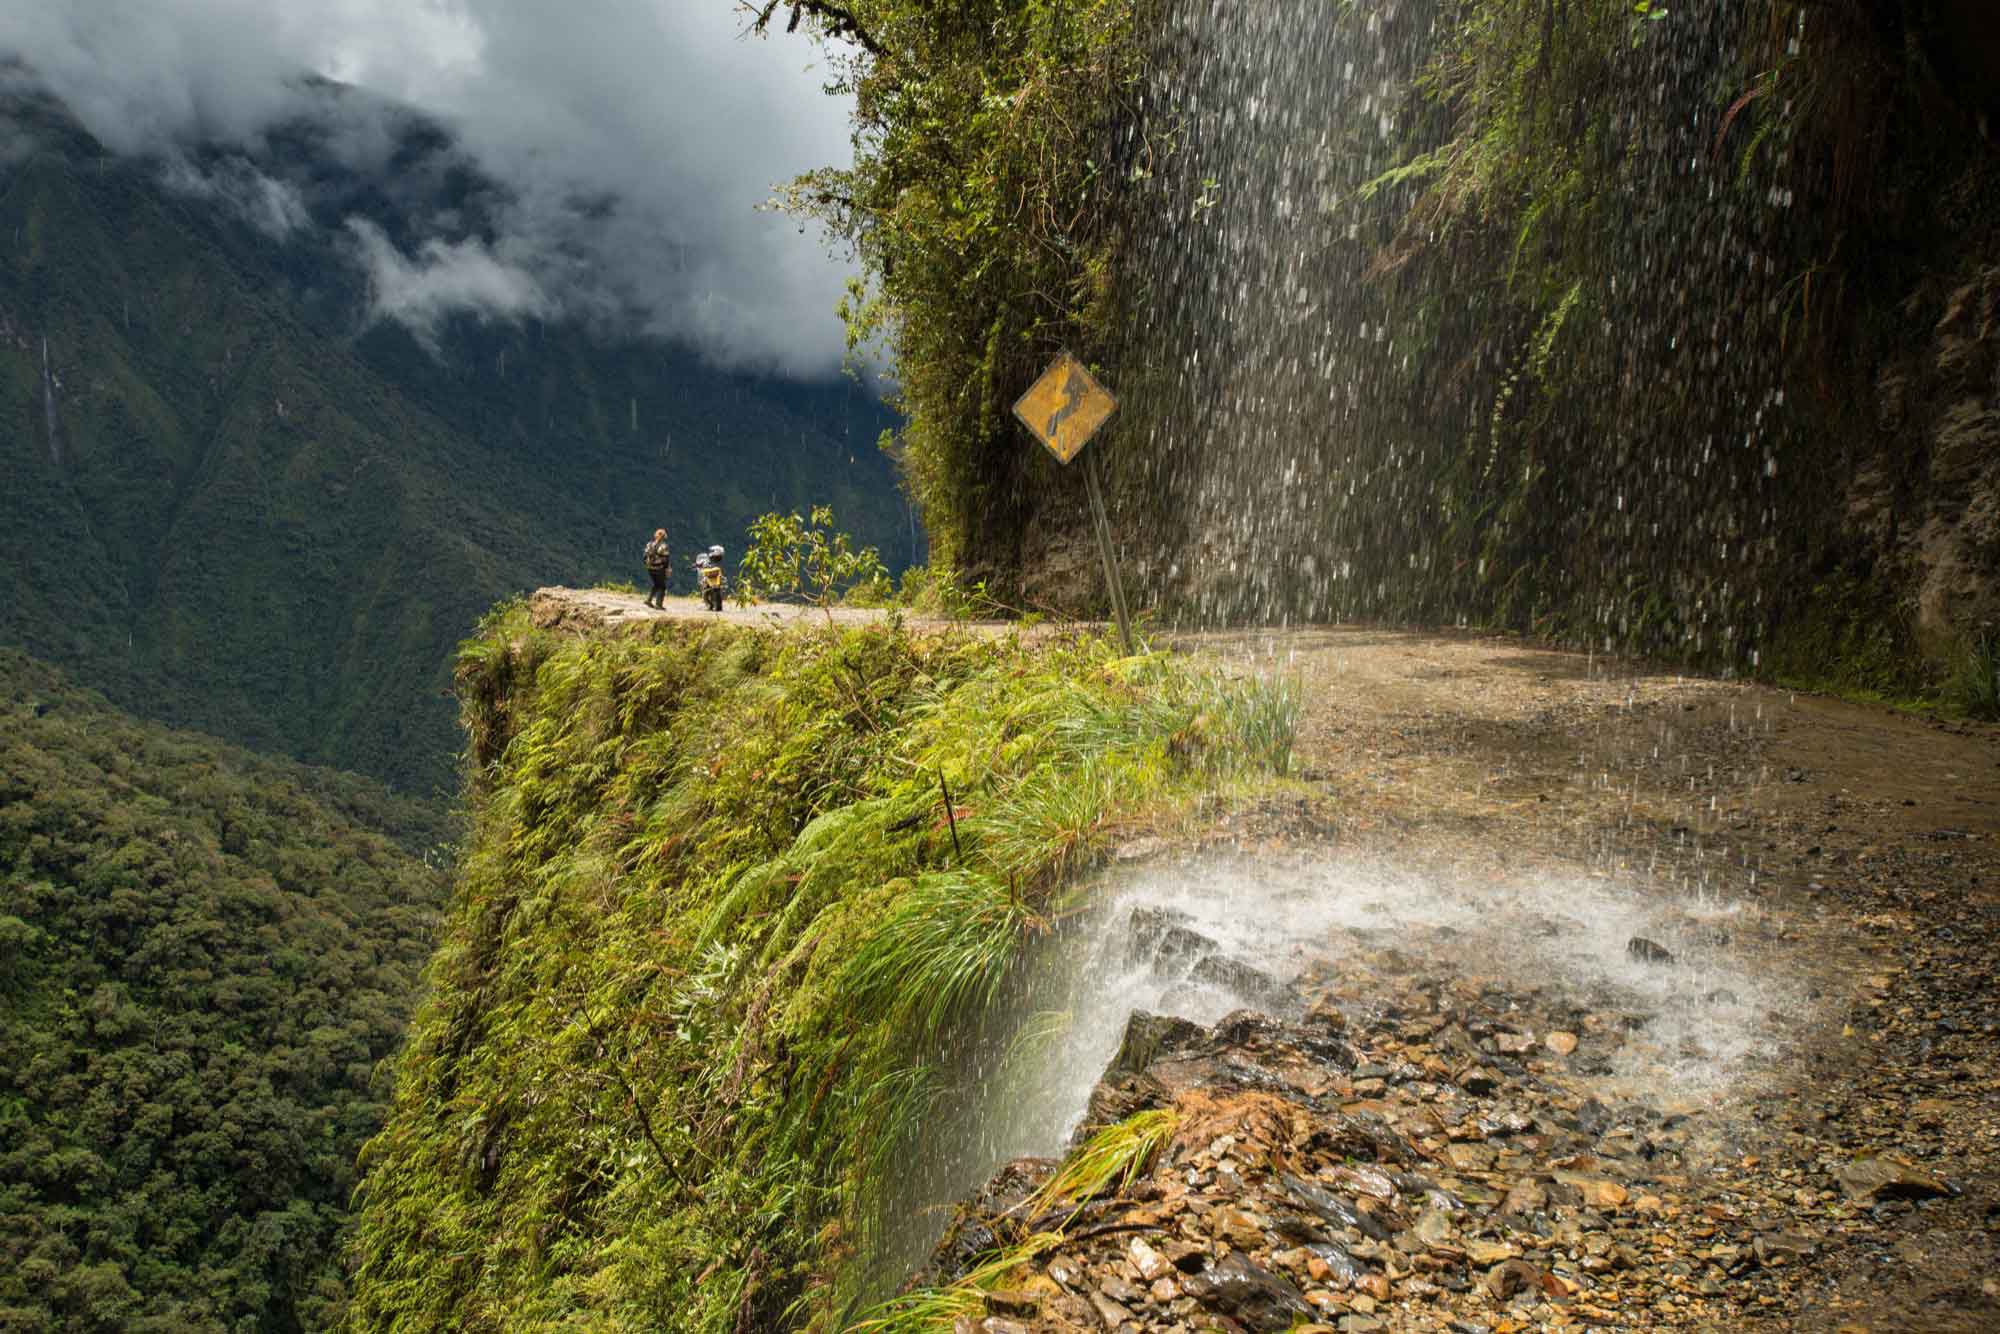 Having survived Bolivia’s “Road of Death” down and back up again, ​it left me windblown, the mind blown and exhilarated. The visceral experience of jaw-on-the-floor views fast became a regular reward from the two years of saving and sacrifice to get there. (La Paz and Yungas region, Bolivia)